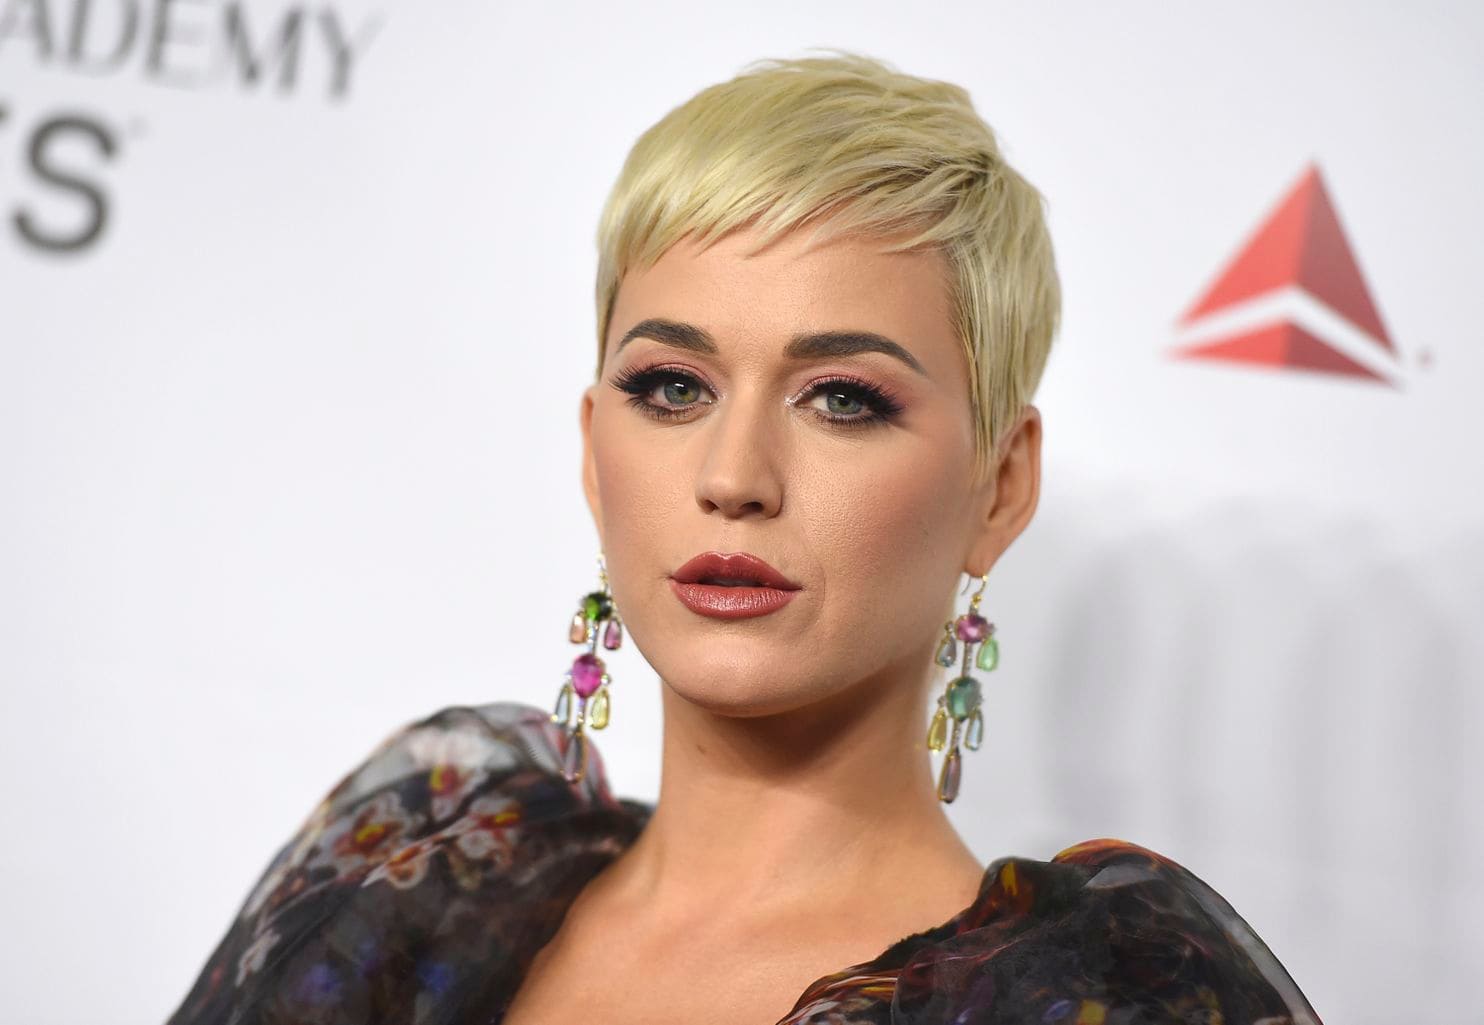 Katy Perry’s blackface shoes garner criticisms, company removes them from collection